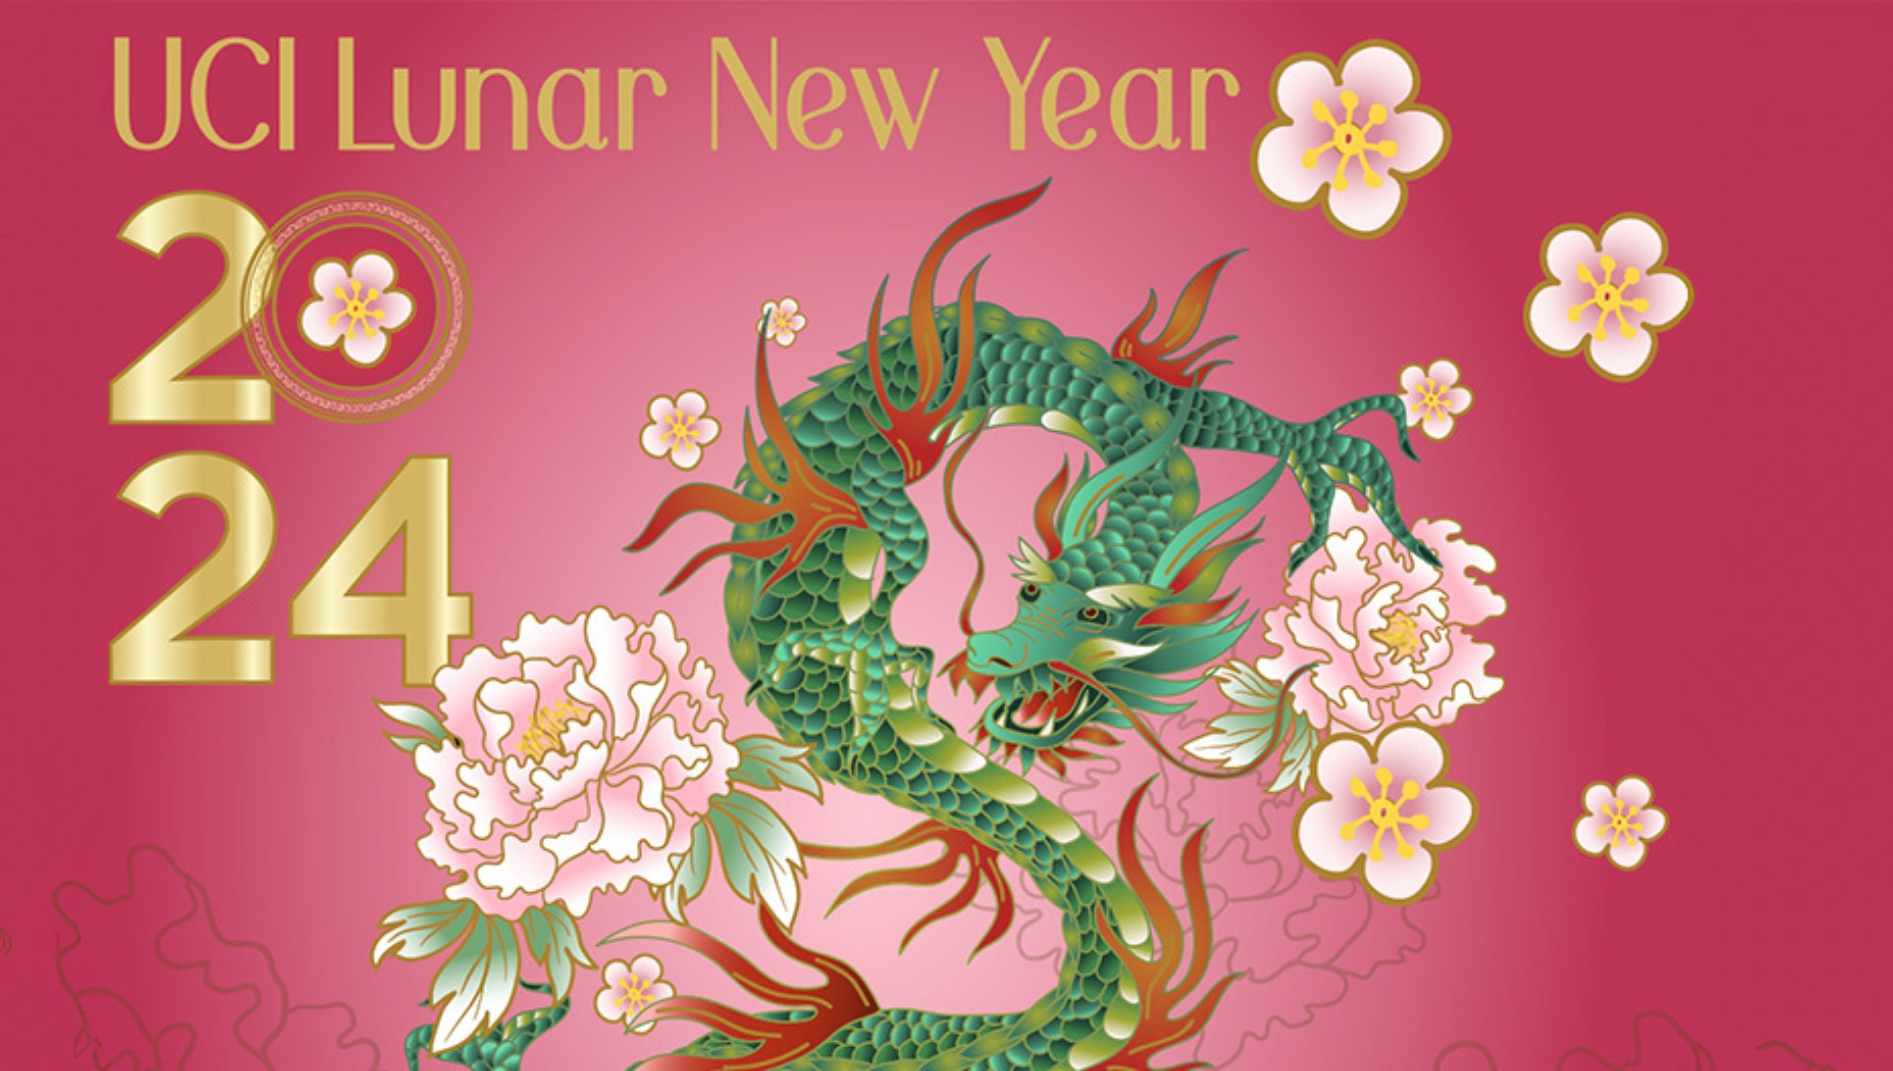 A dragon on a pick background with the text "UCI Lunar New Year 2024"